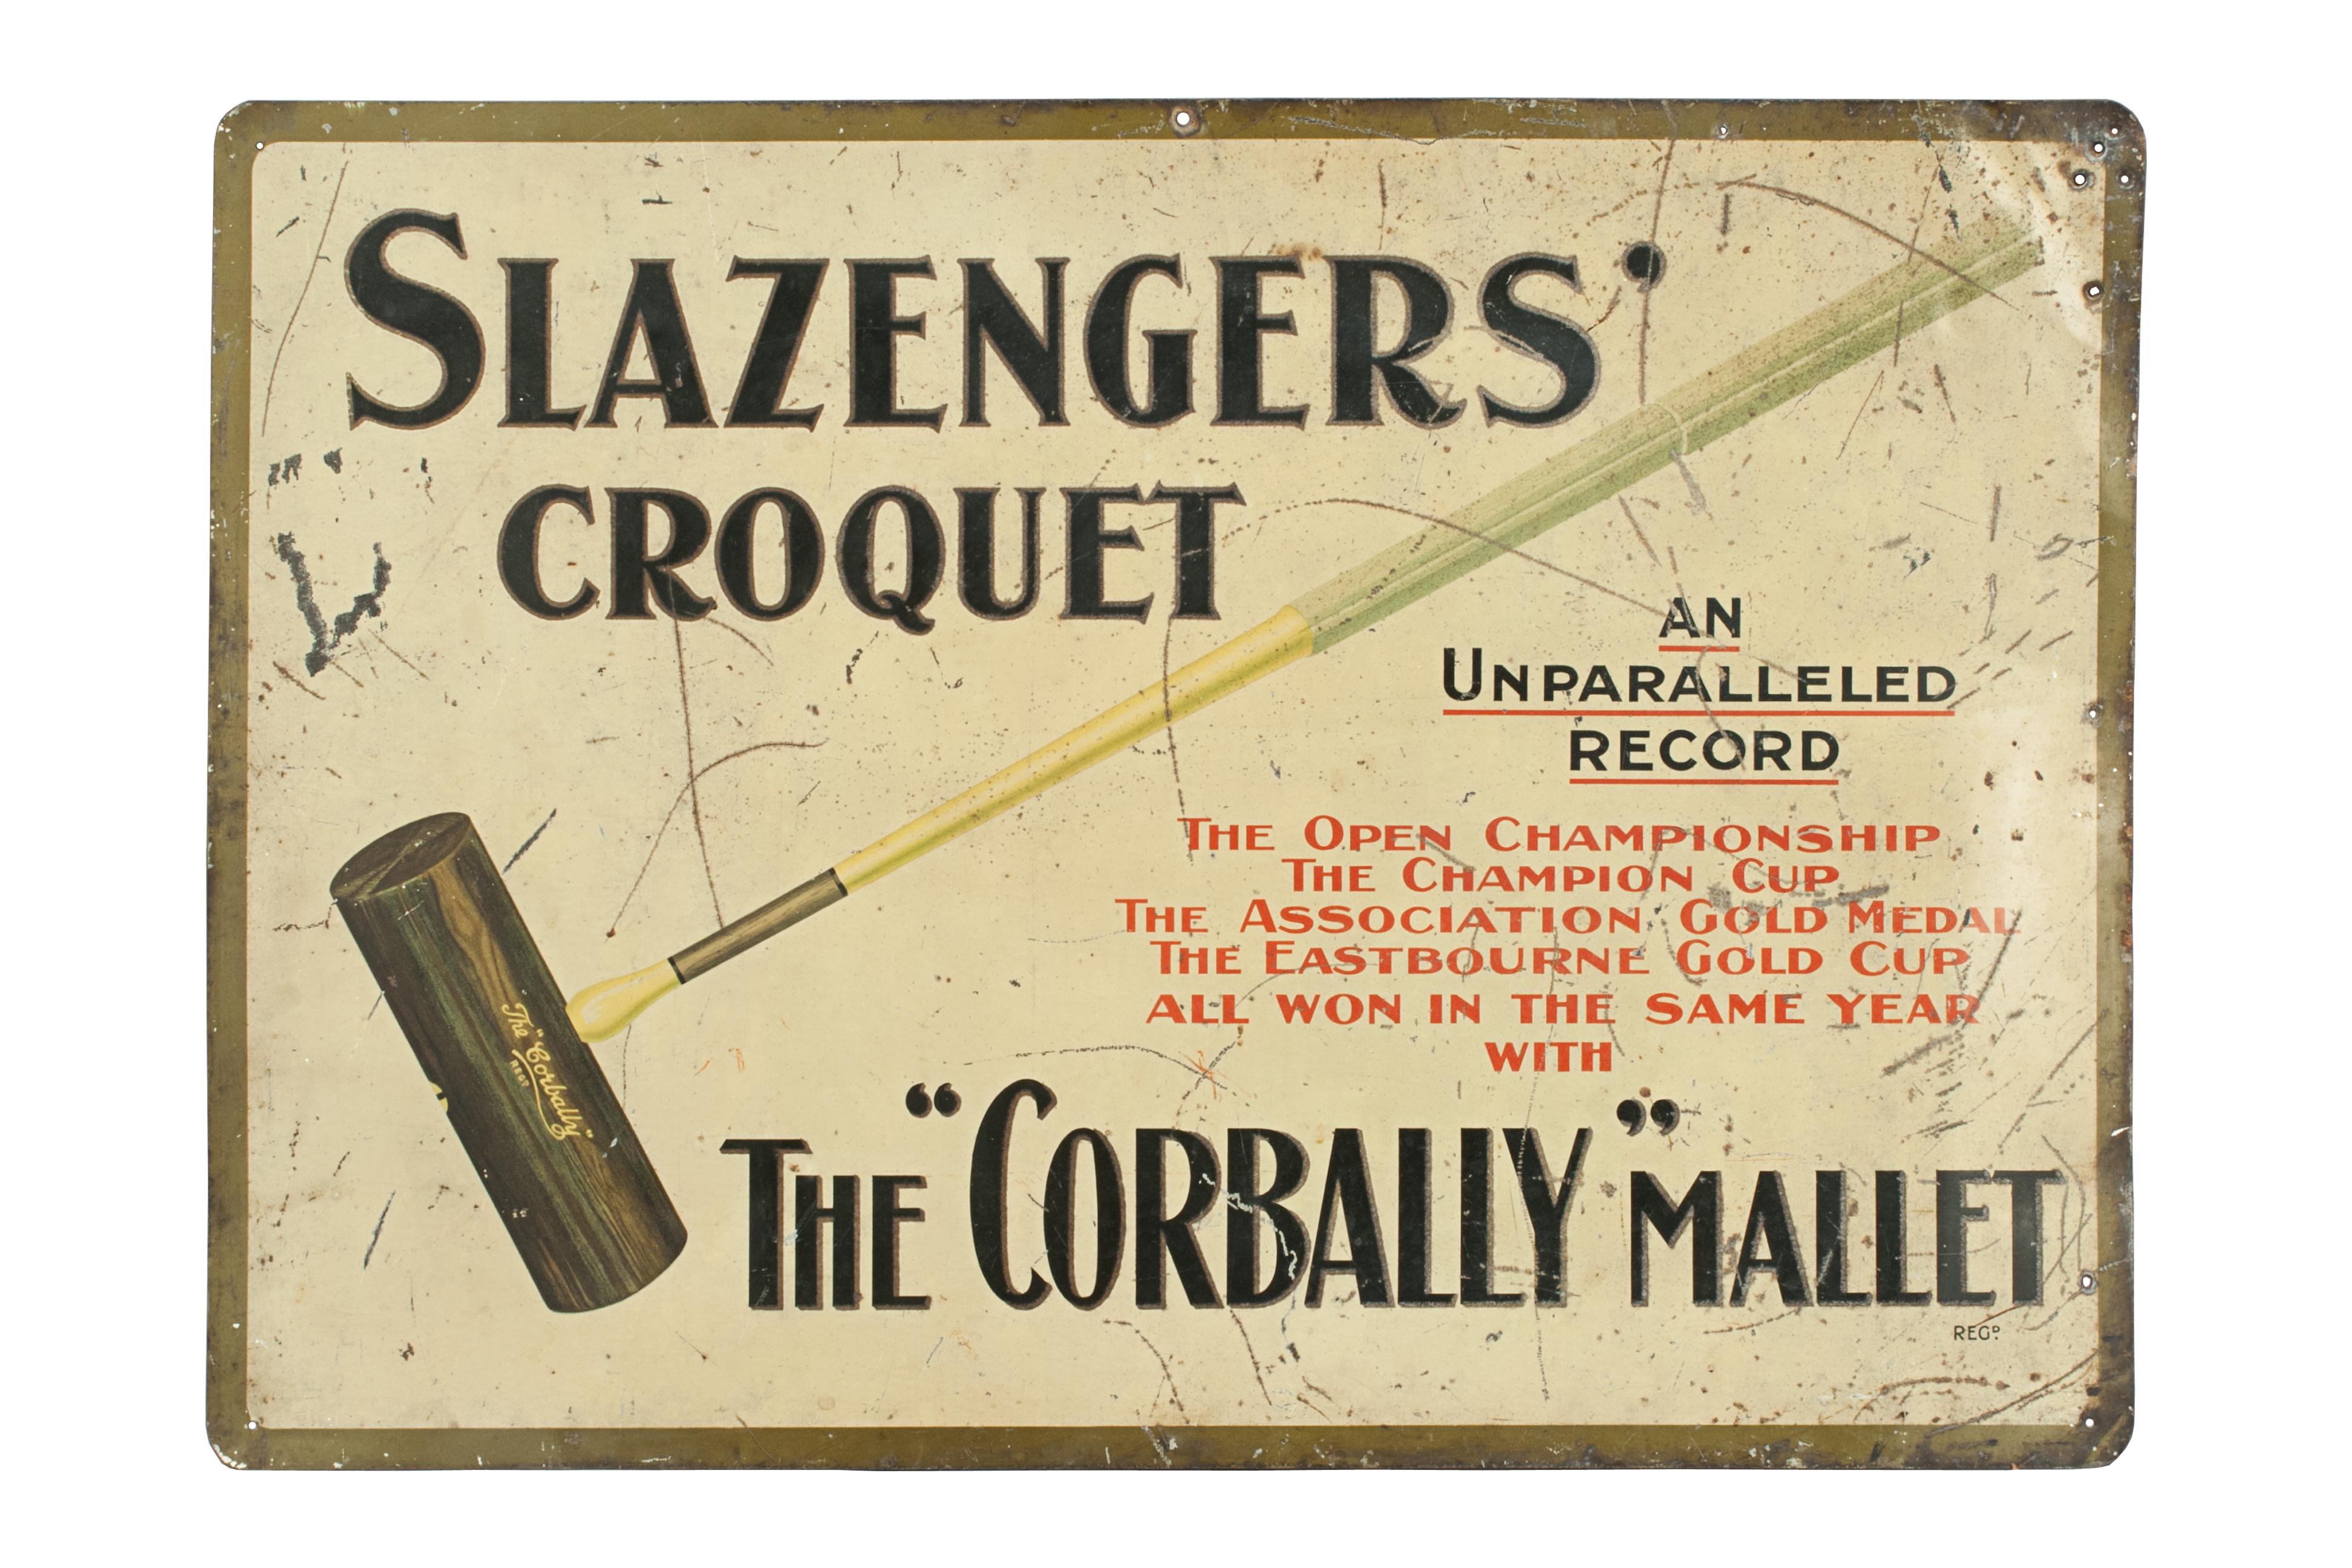 Slazengers Tin Advertising Sign 'The Corbally' Mallet.
This is a rare Slazengers advertising sign for their croquet mallet called 'The Corbally' Mallet. It had an unparalleled record as stated on the sign, The Open Championship, The Champion Cup,